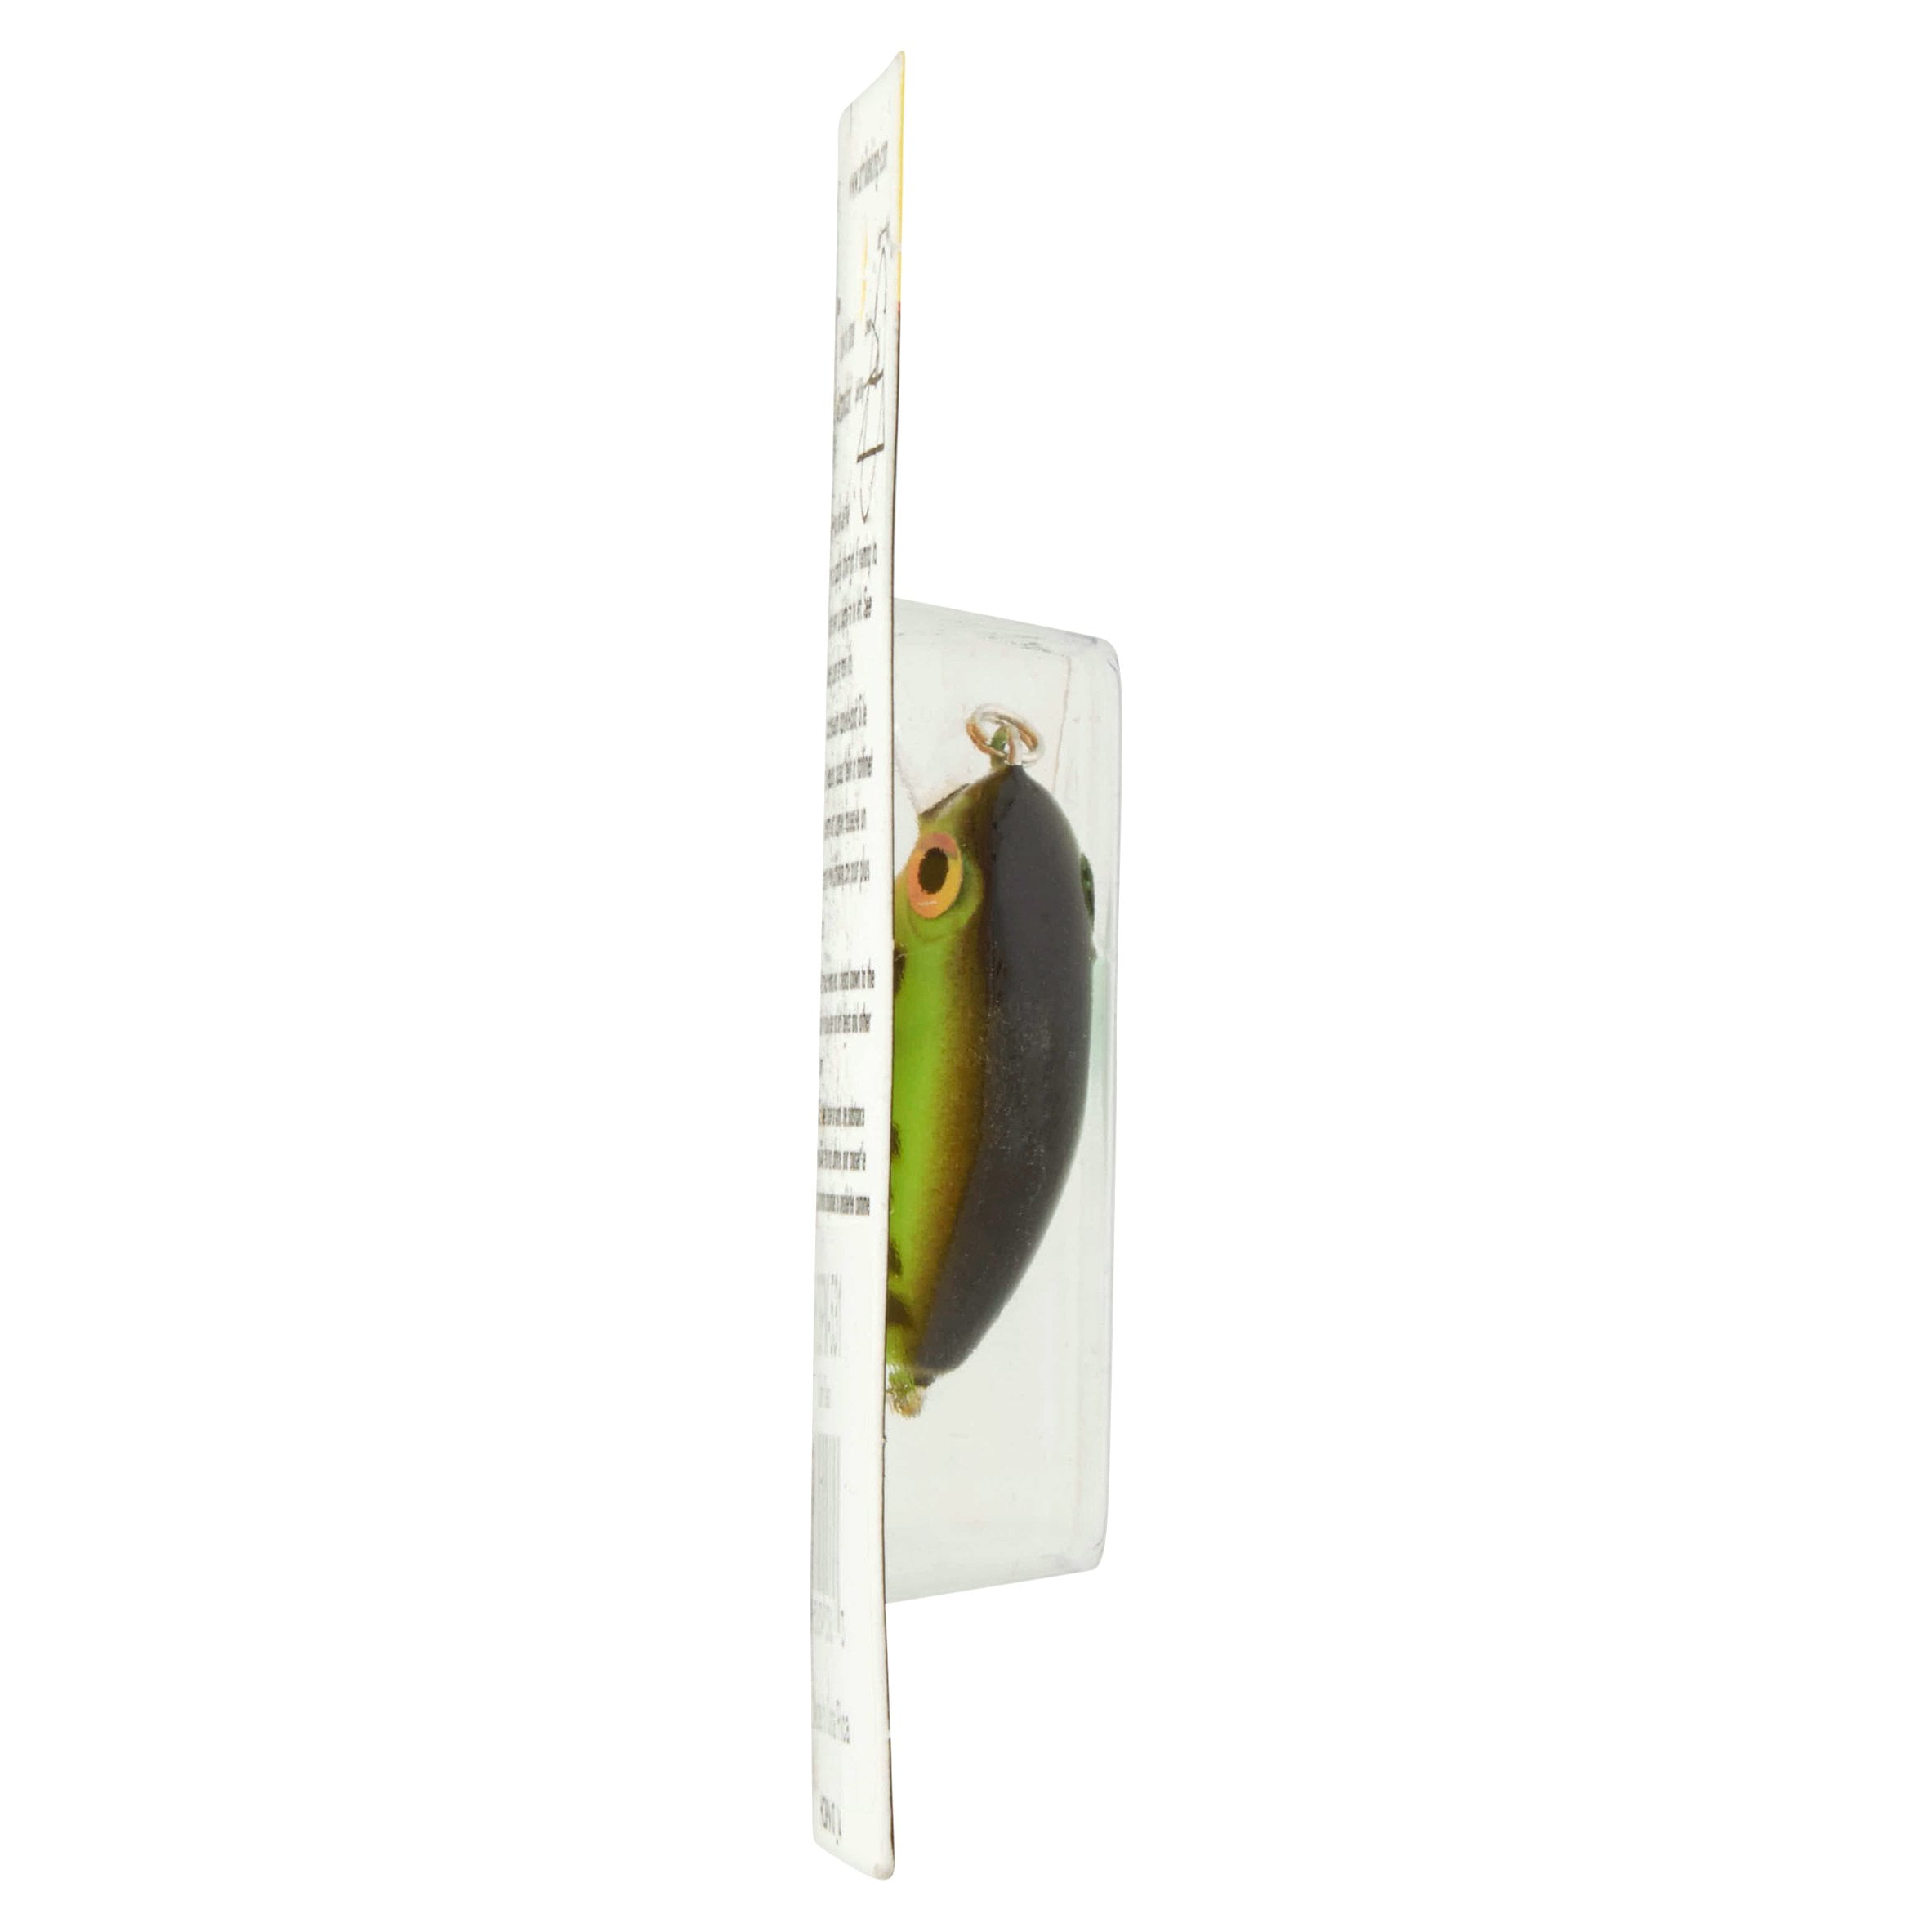 strike king bitsy minnow panfish trout bass crappie crankbait 1.25 gizzard  shad